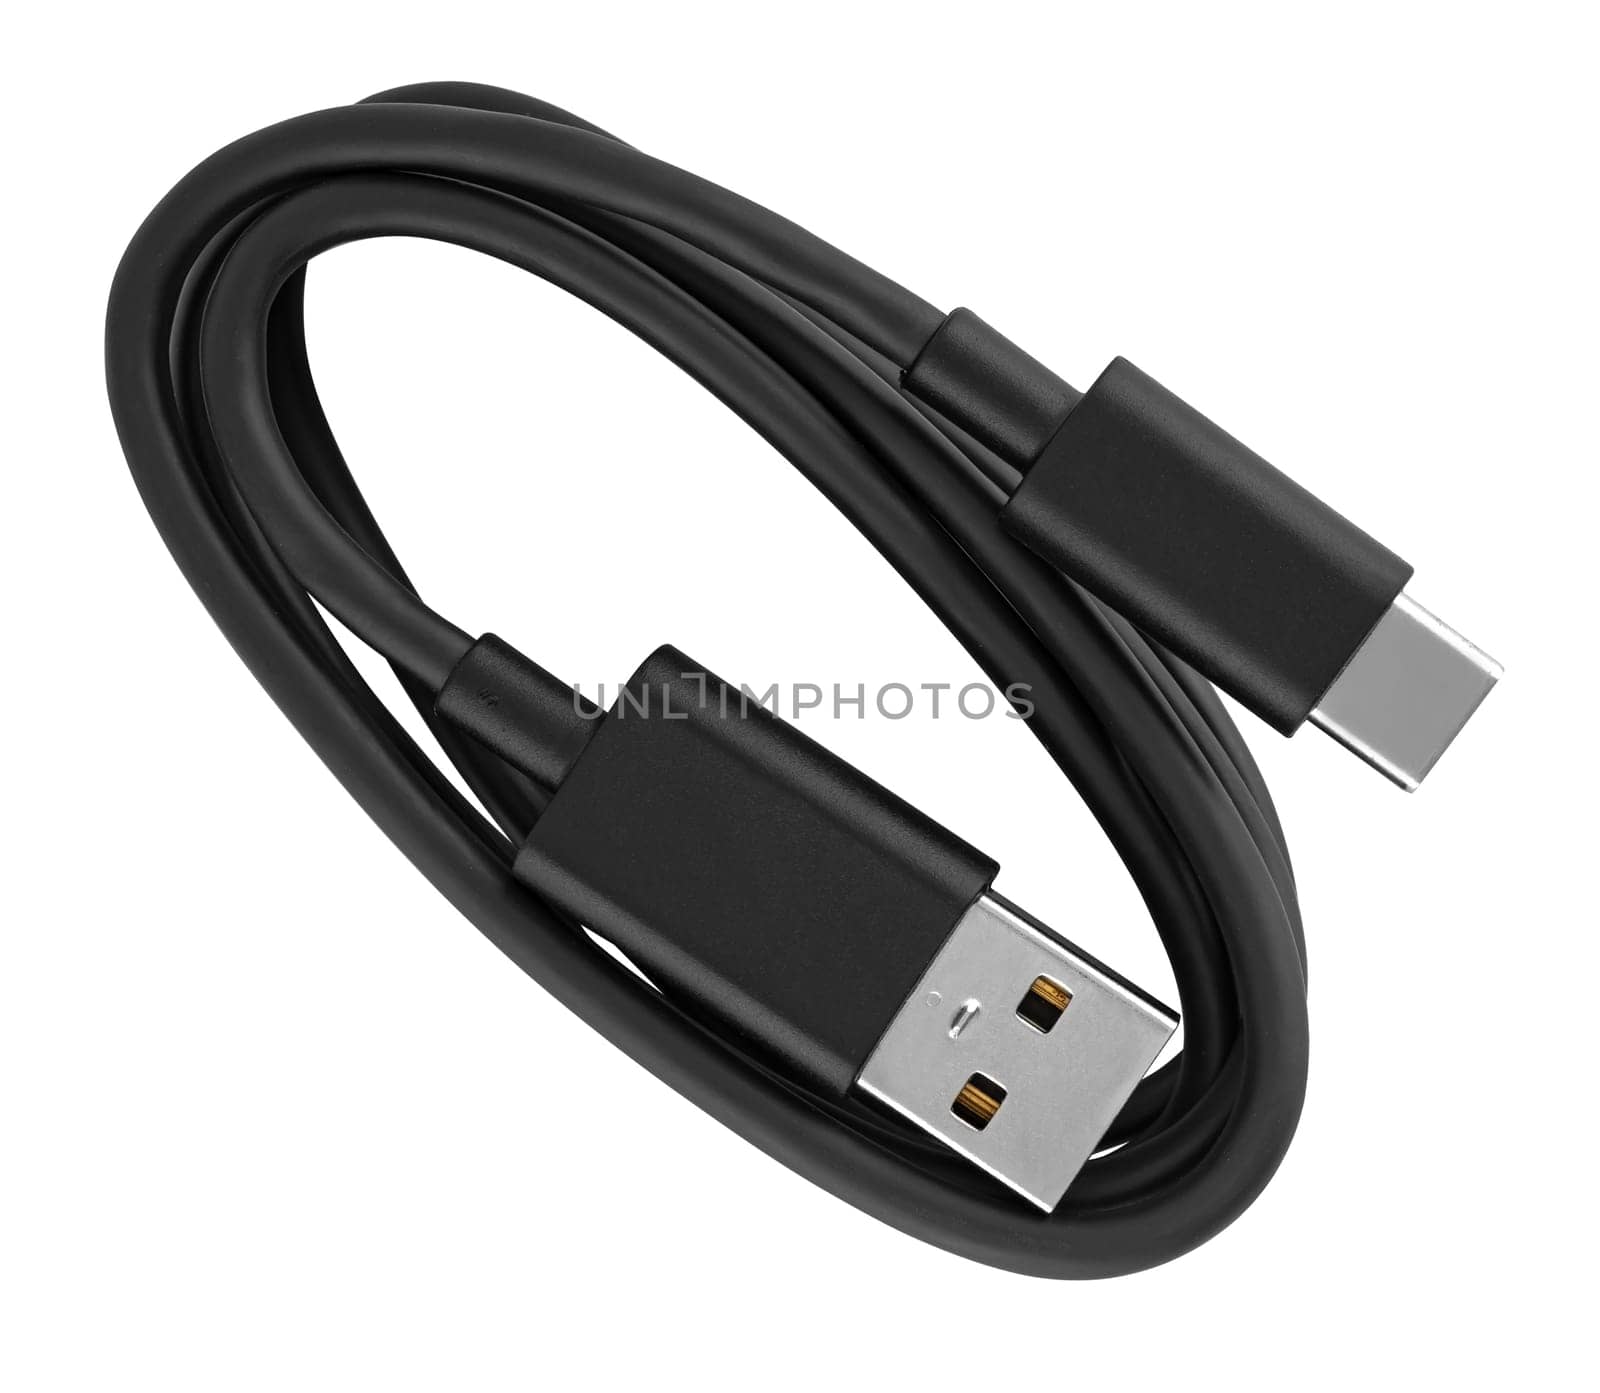 Cable and Type-C and USB connector on white background